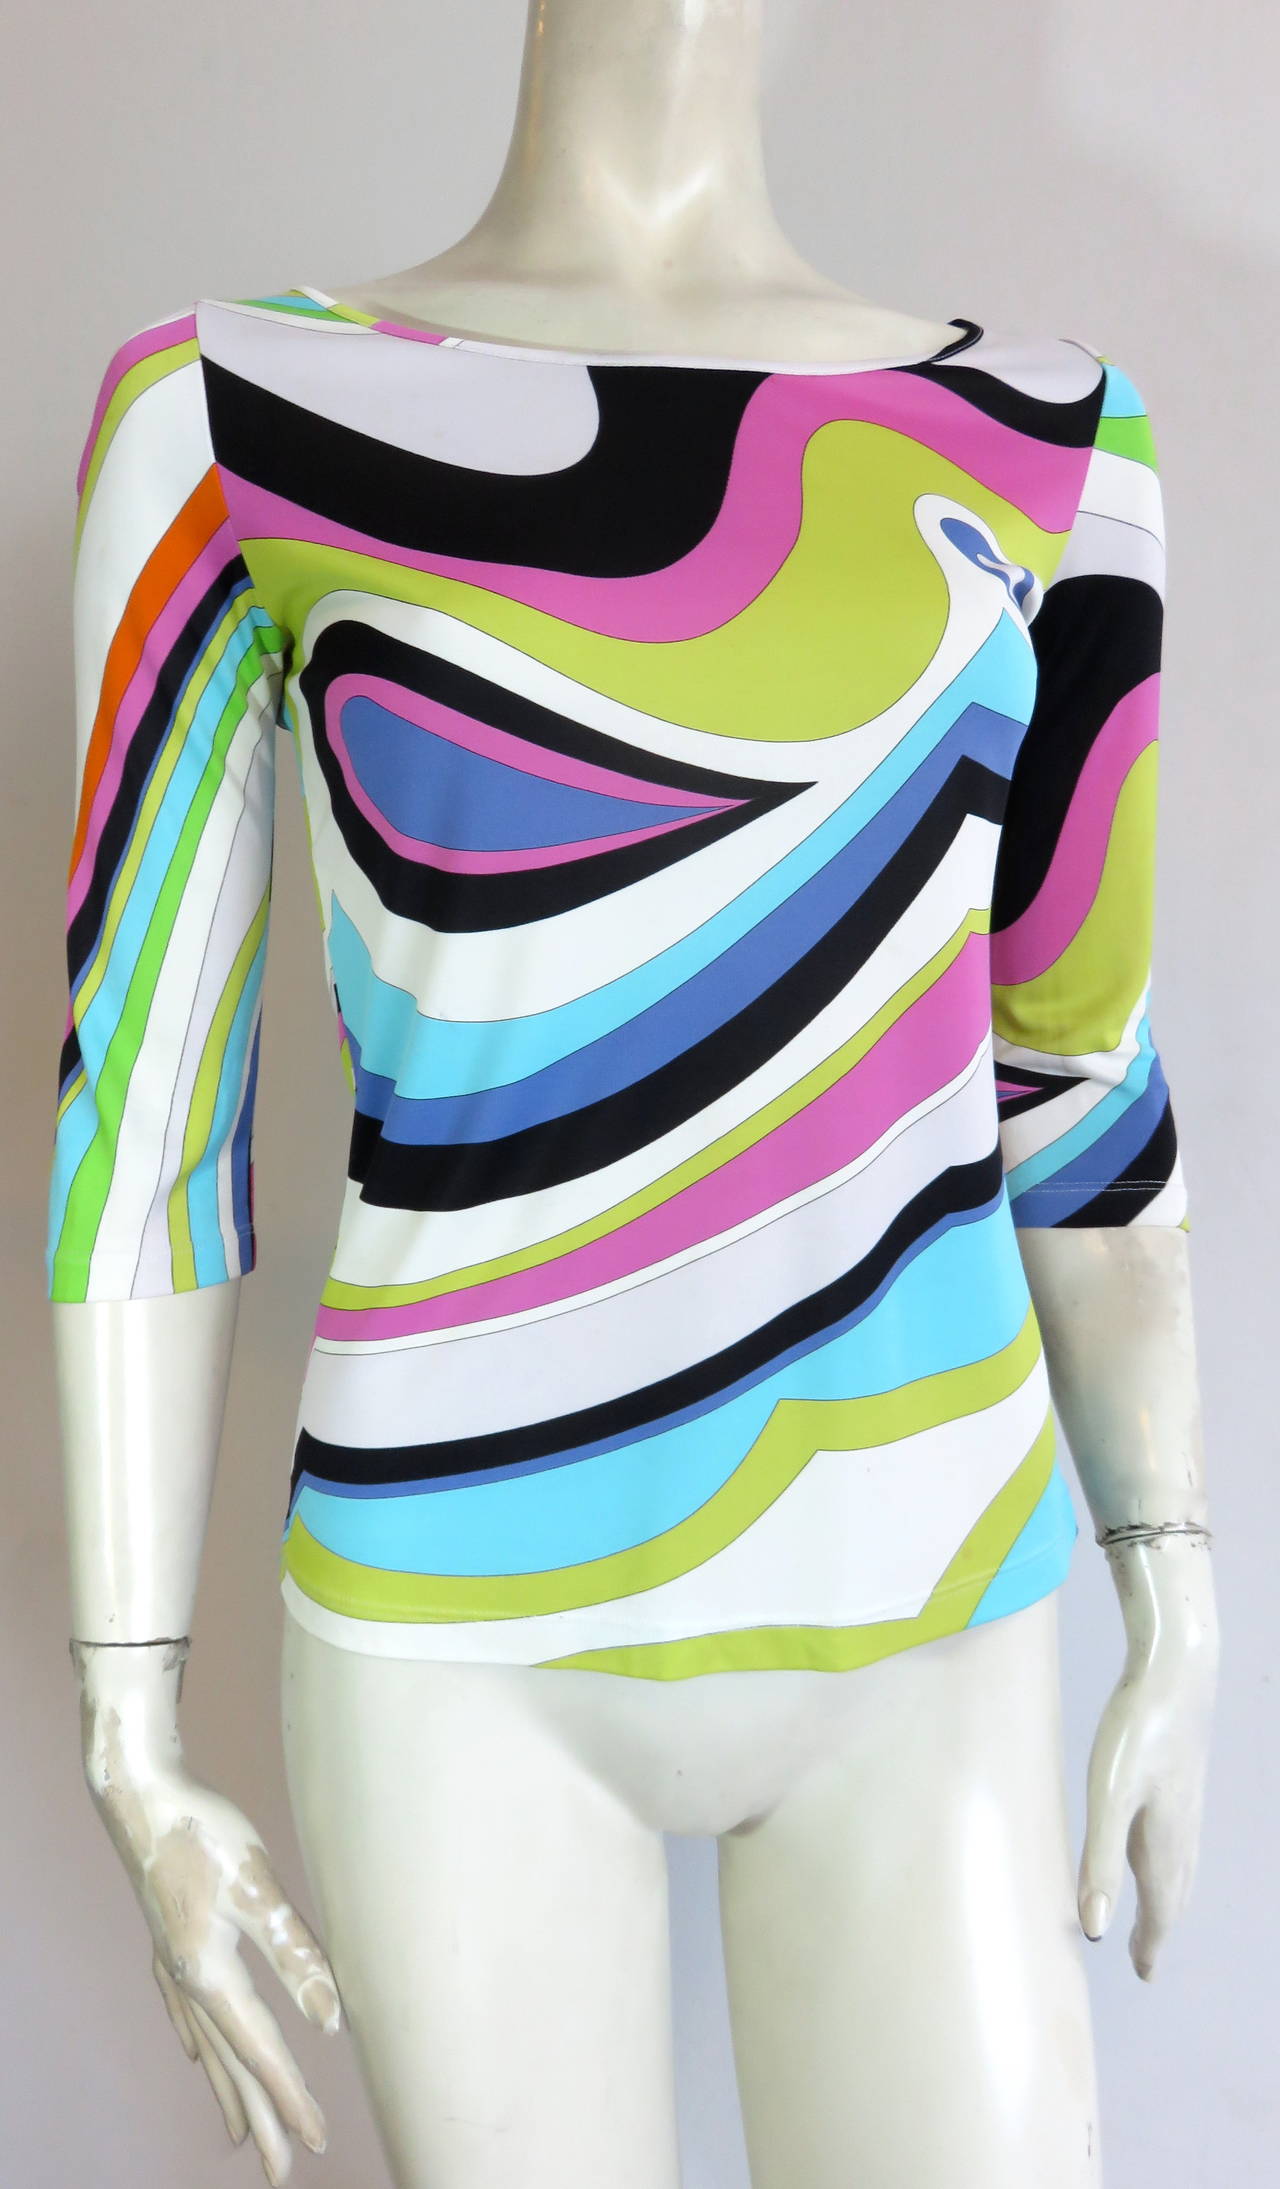 EMILIO PUCCI, rainbow swirl print stretchy top.

Signed artwork print.

Scooped neckline opening with 3/4-length sleeves.

Made in Italy, as labeled.

*MEASUREMENTS*

The inside size/content label was removed.  The top suits a US size